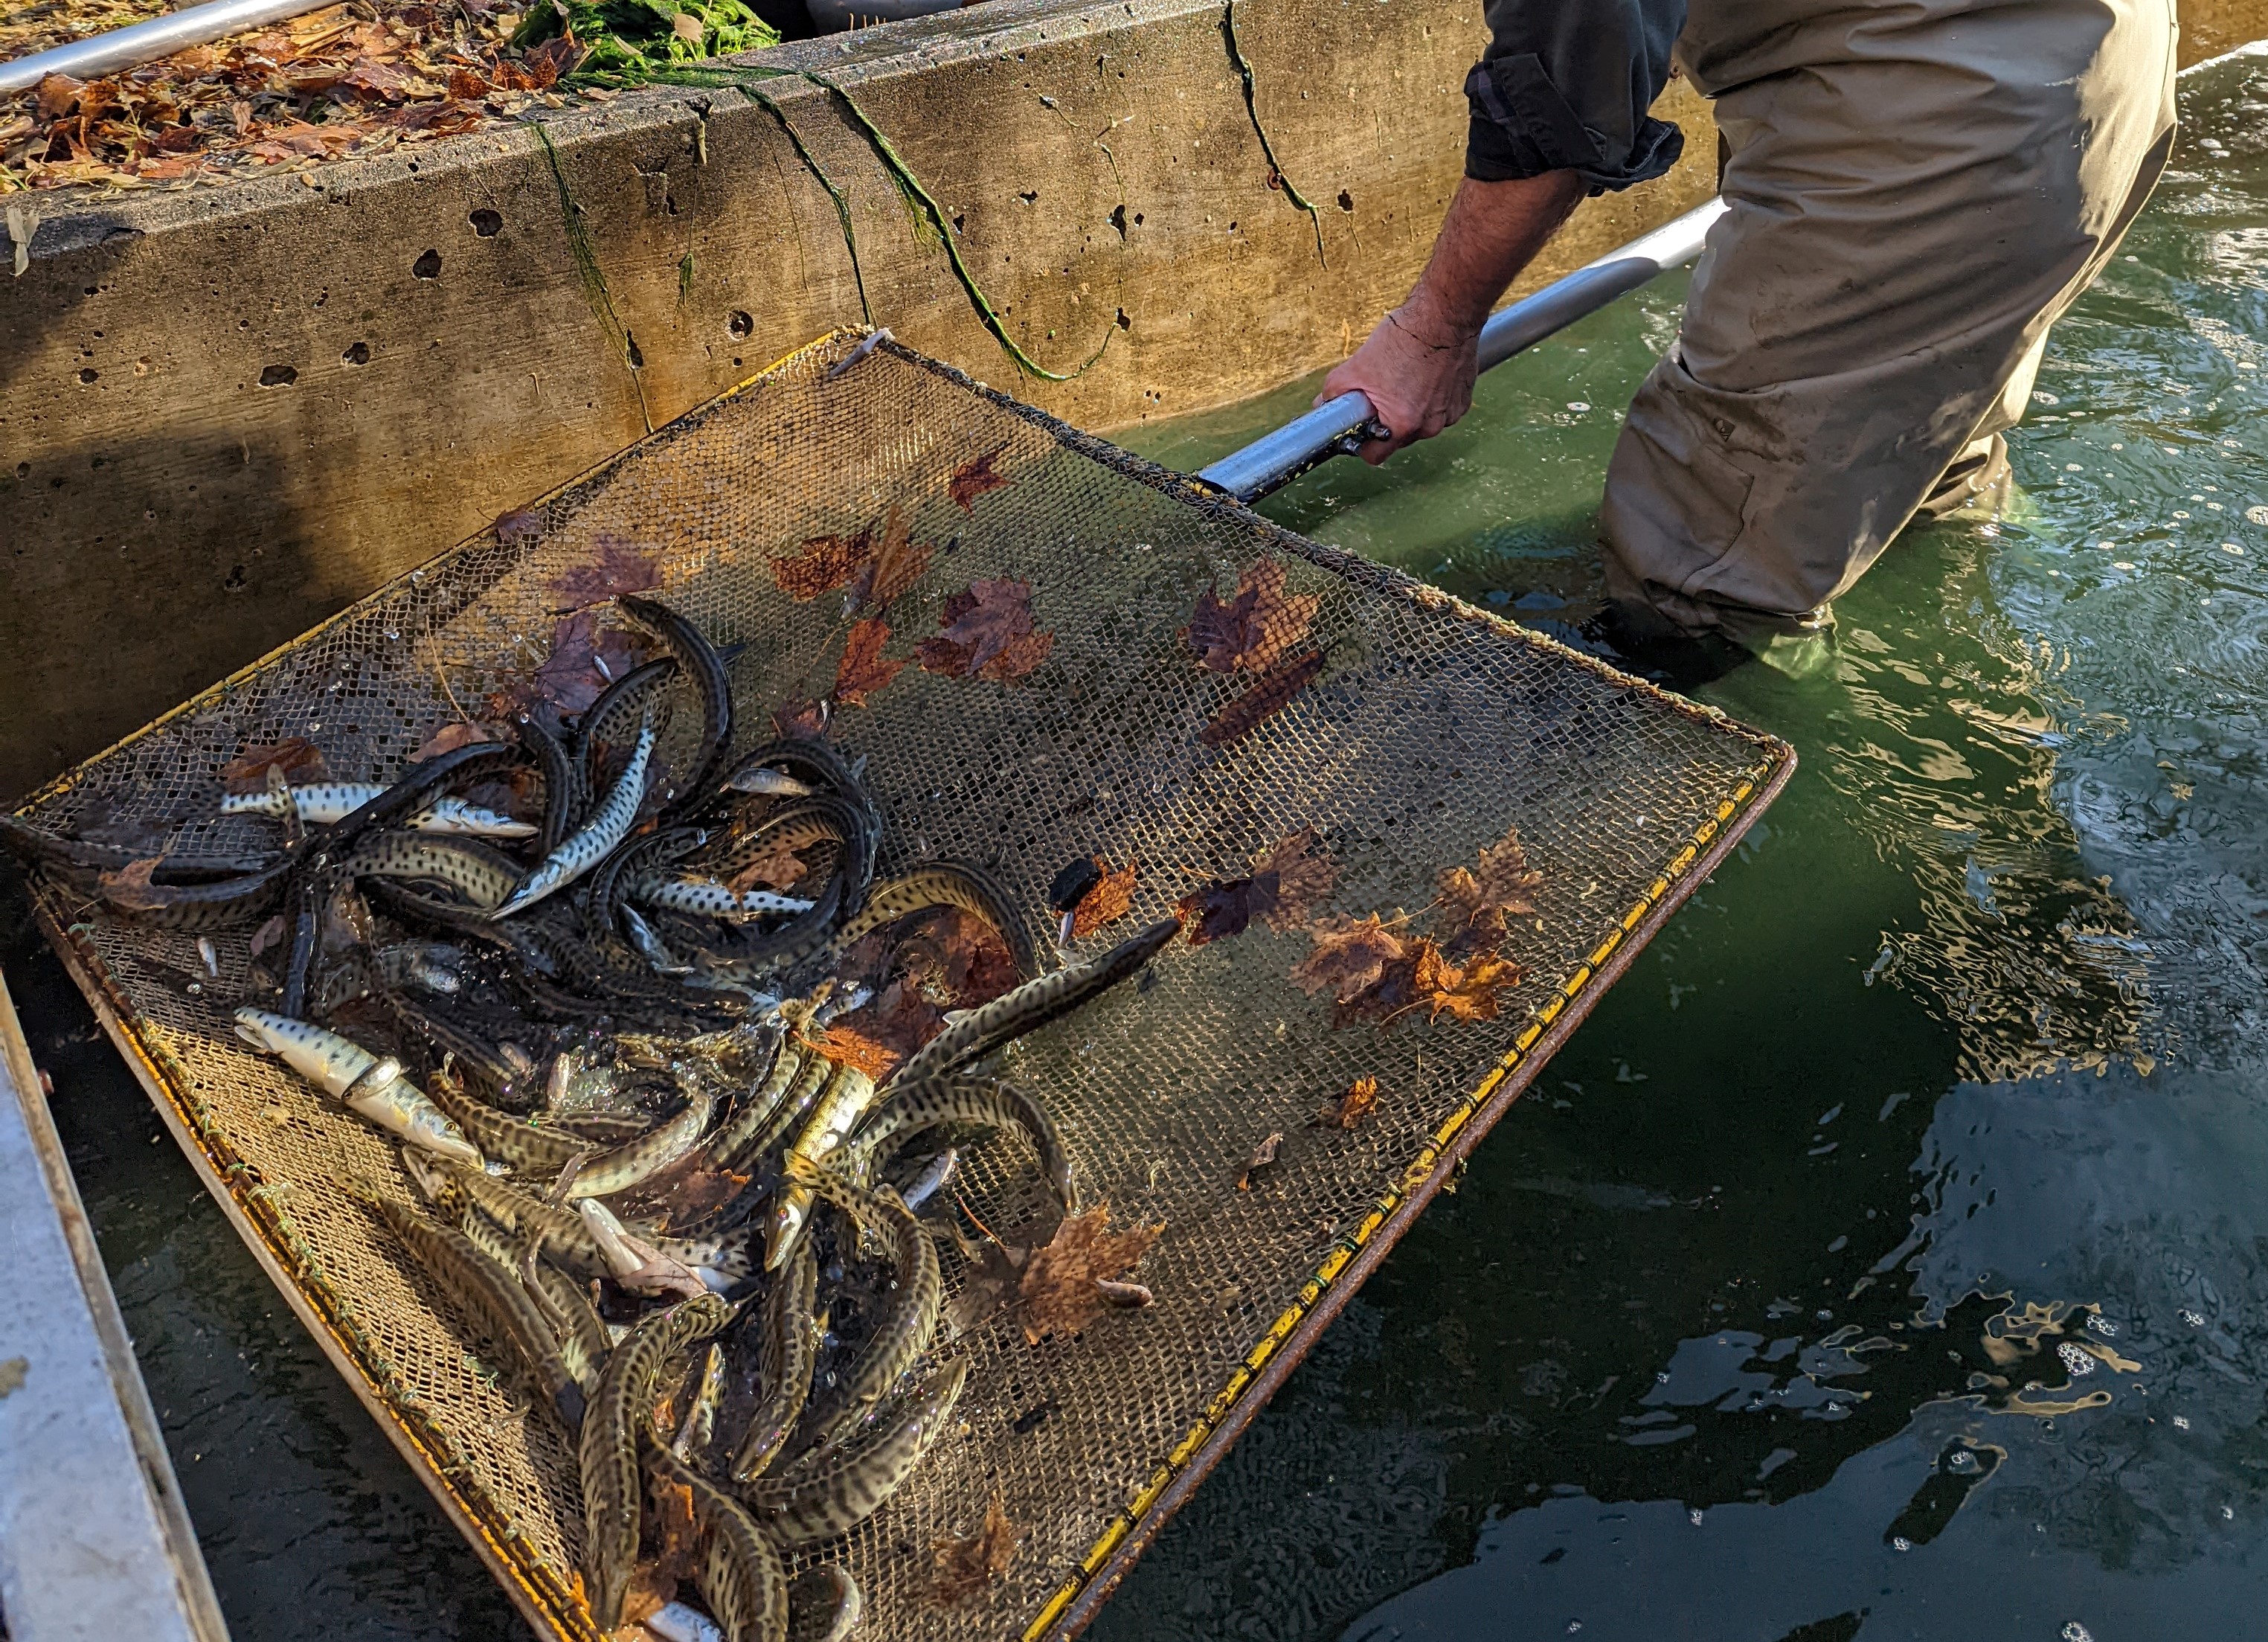 DNR stocked Michigan waters with 7.8 tons of fish in fall 2022, see where 